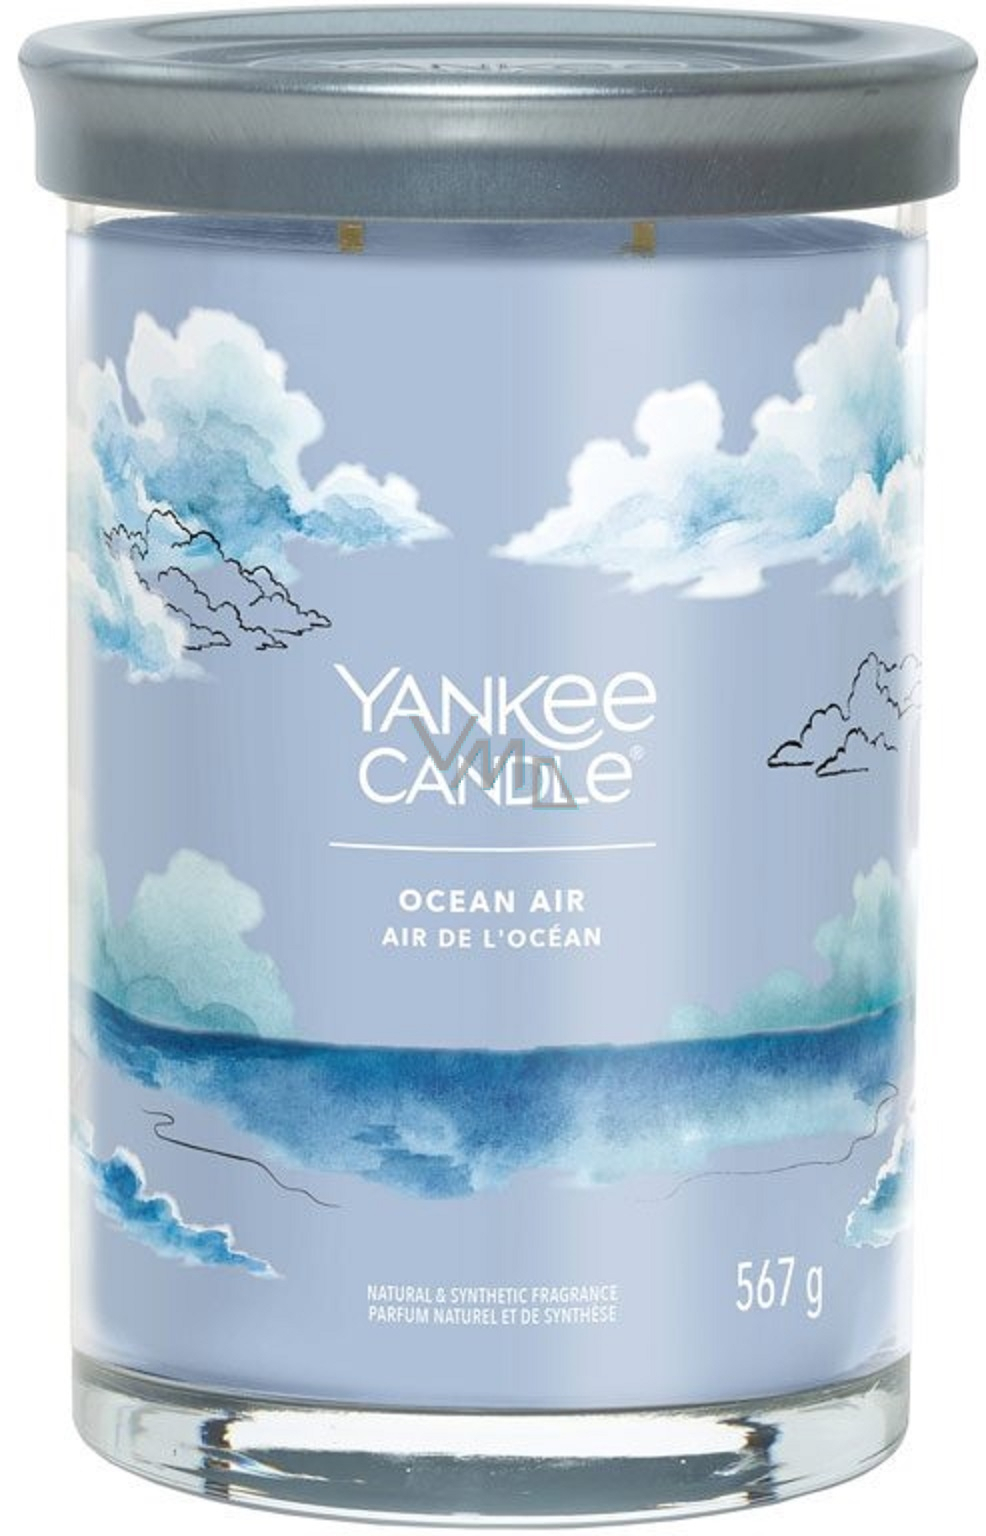 Yankee Candle Ocean Air - Ocean Air scented candle Signature Tumbler large  glass 2 wicks 567 g - VMD parfumerie - drogerie